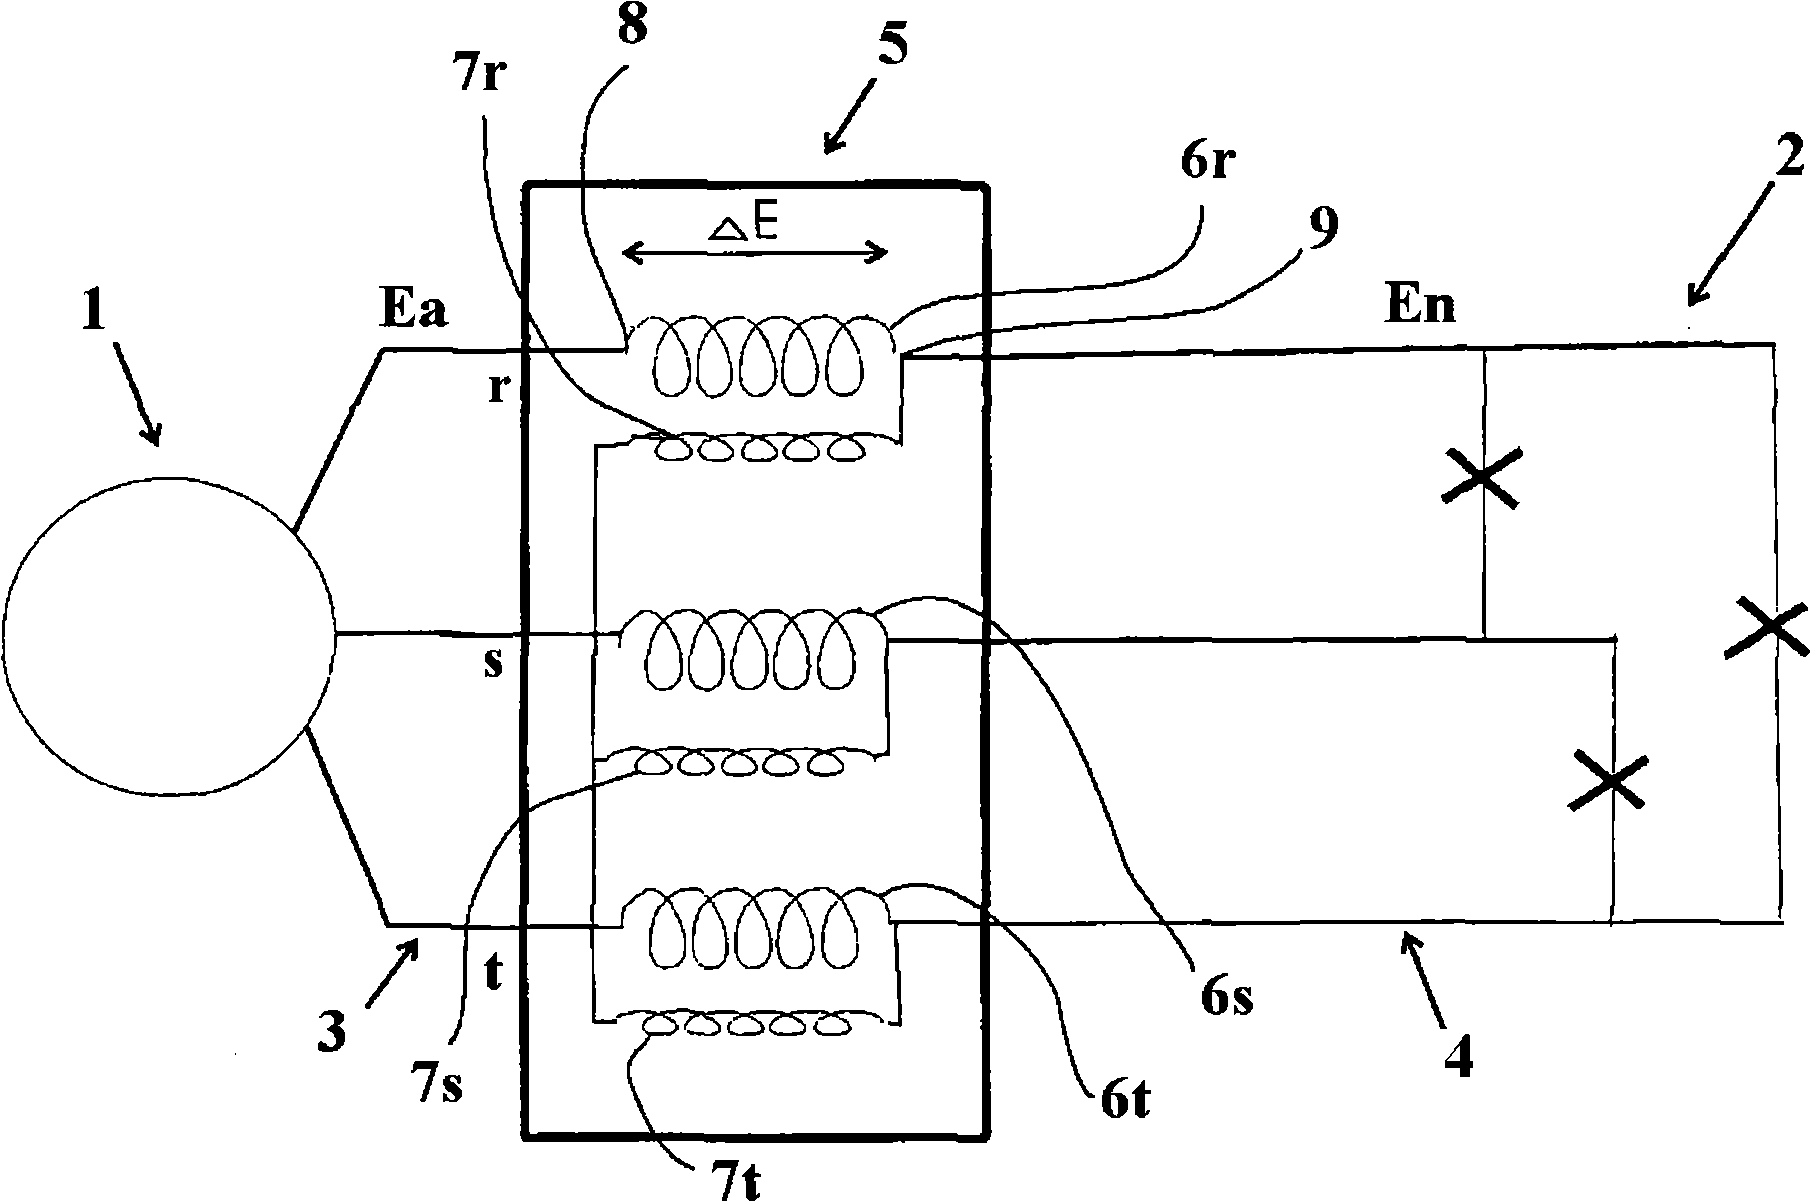 Induction regulator for controlling energy flow used in alternating current transmission network, and method for controlling the network